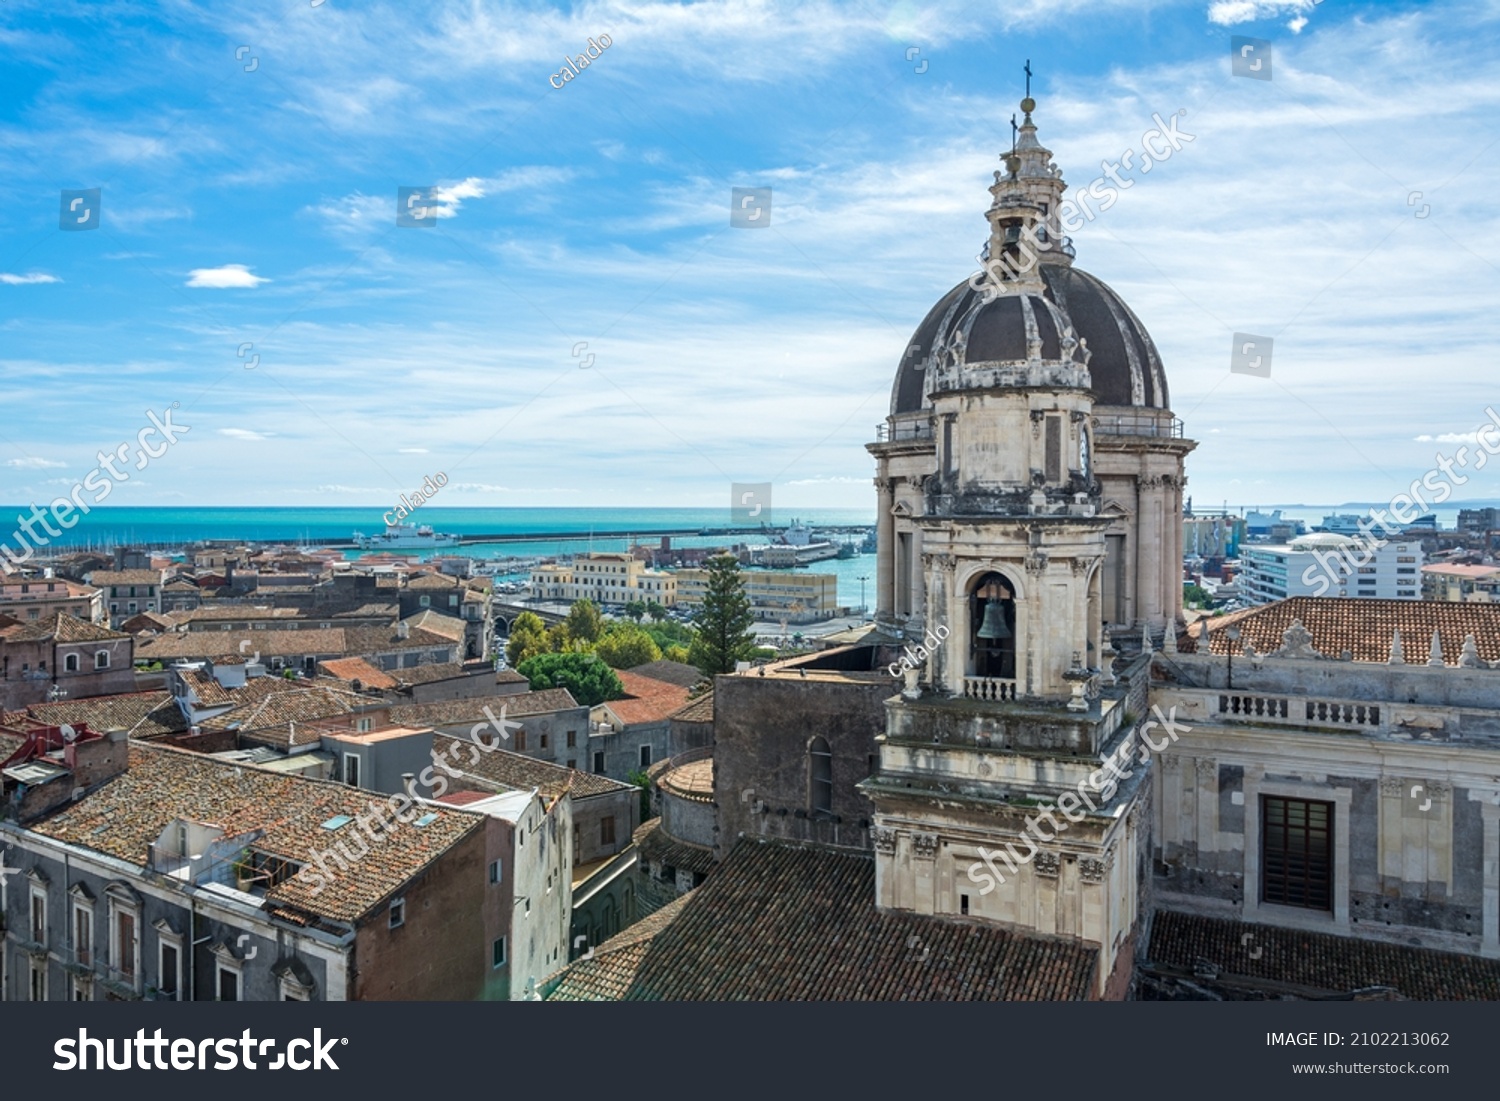 View over the cityscape of Catania on the island of Sicily in Italy with famous cathedral (Cattedrale di Sant'Agata) and harbour  #2102213062